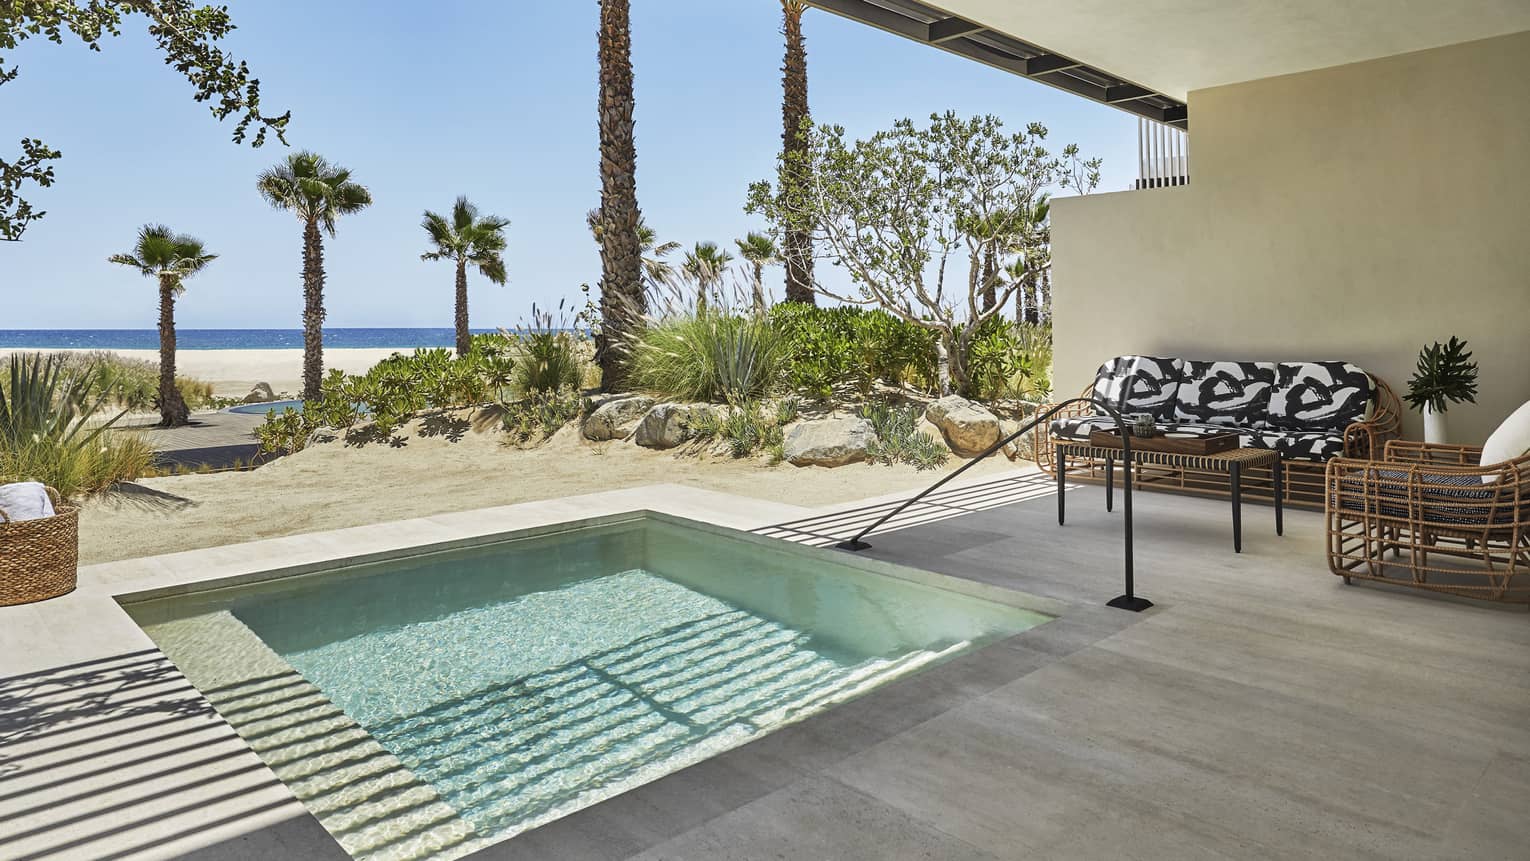 A small pool inside a suite that is open to a beach and palm trees outside.